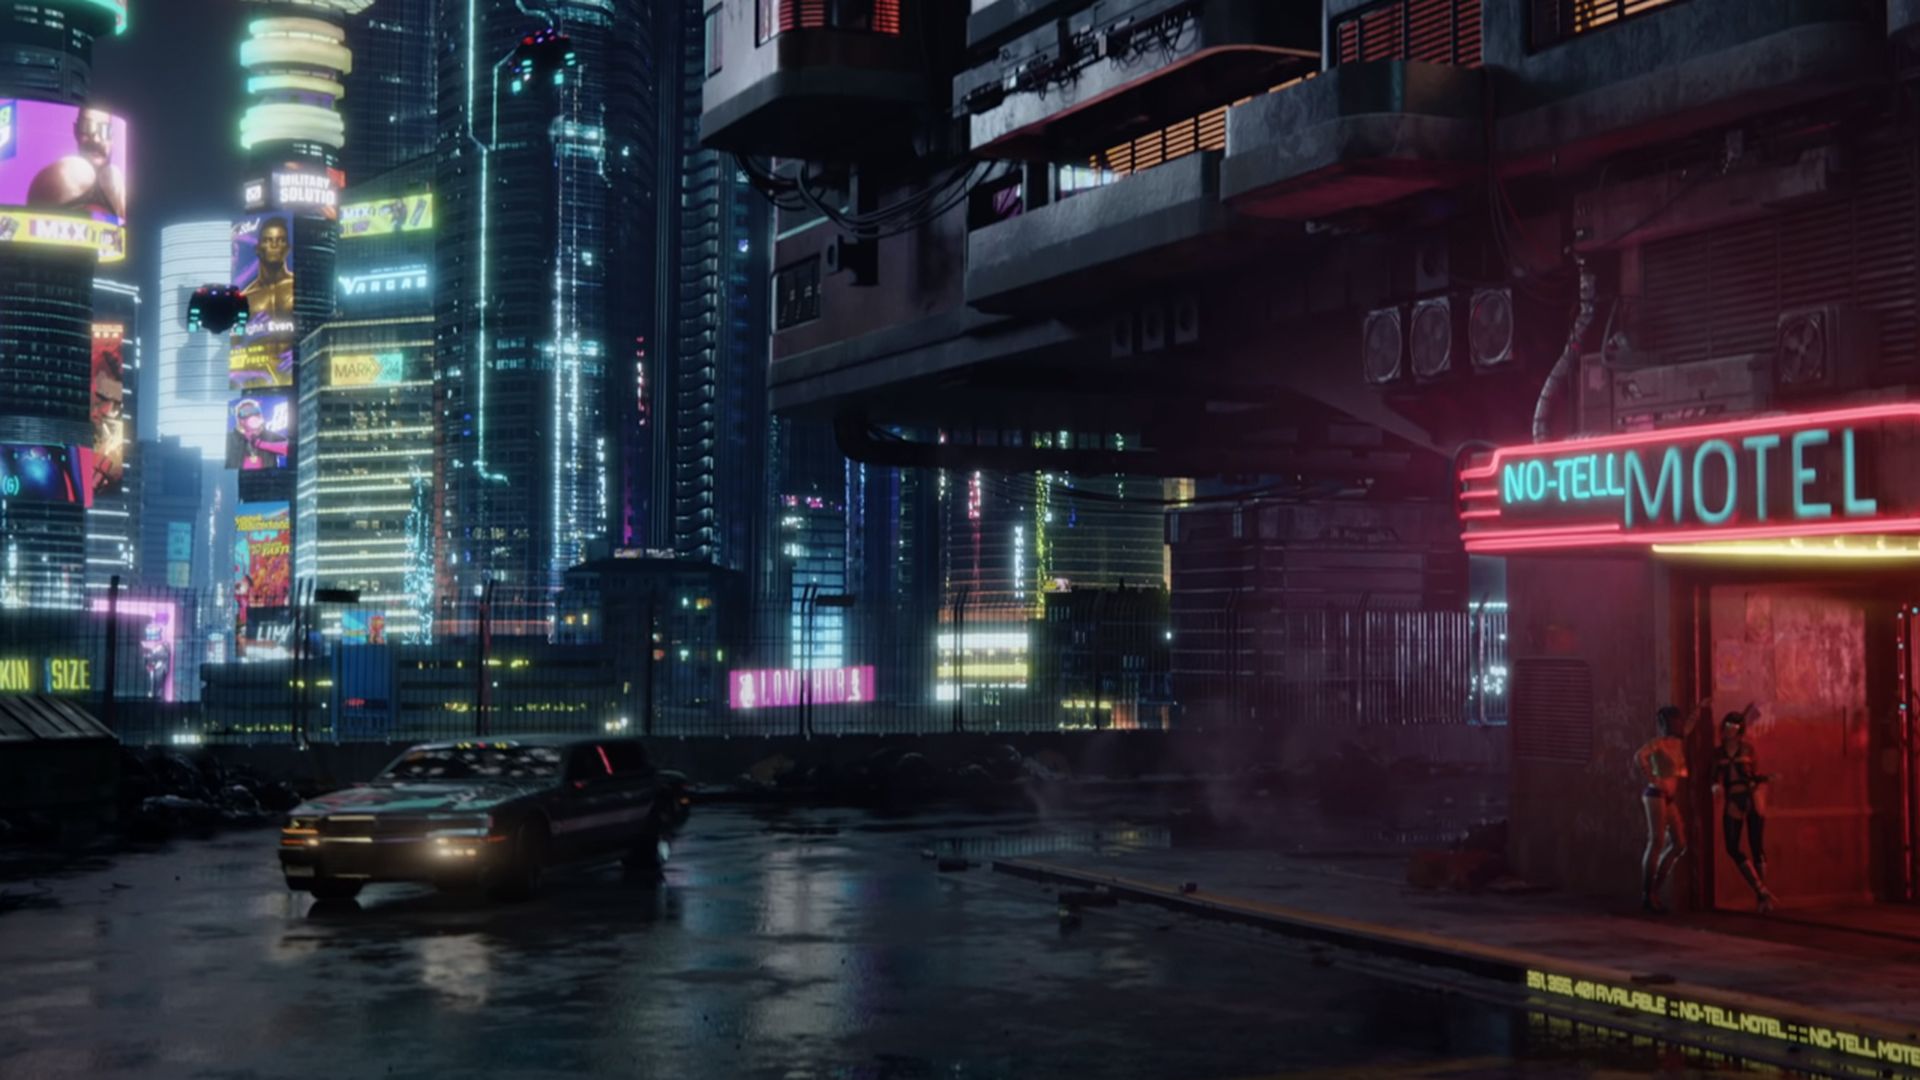 After a shaky start, Cyberpunk 2077 appears to have regained its feet. The RPG has surpassed games such as Modern Warfare 2 and FIFA 23 to become Steam's...